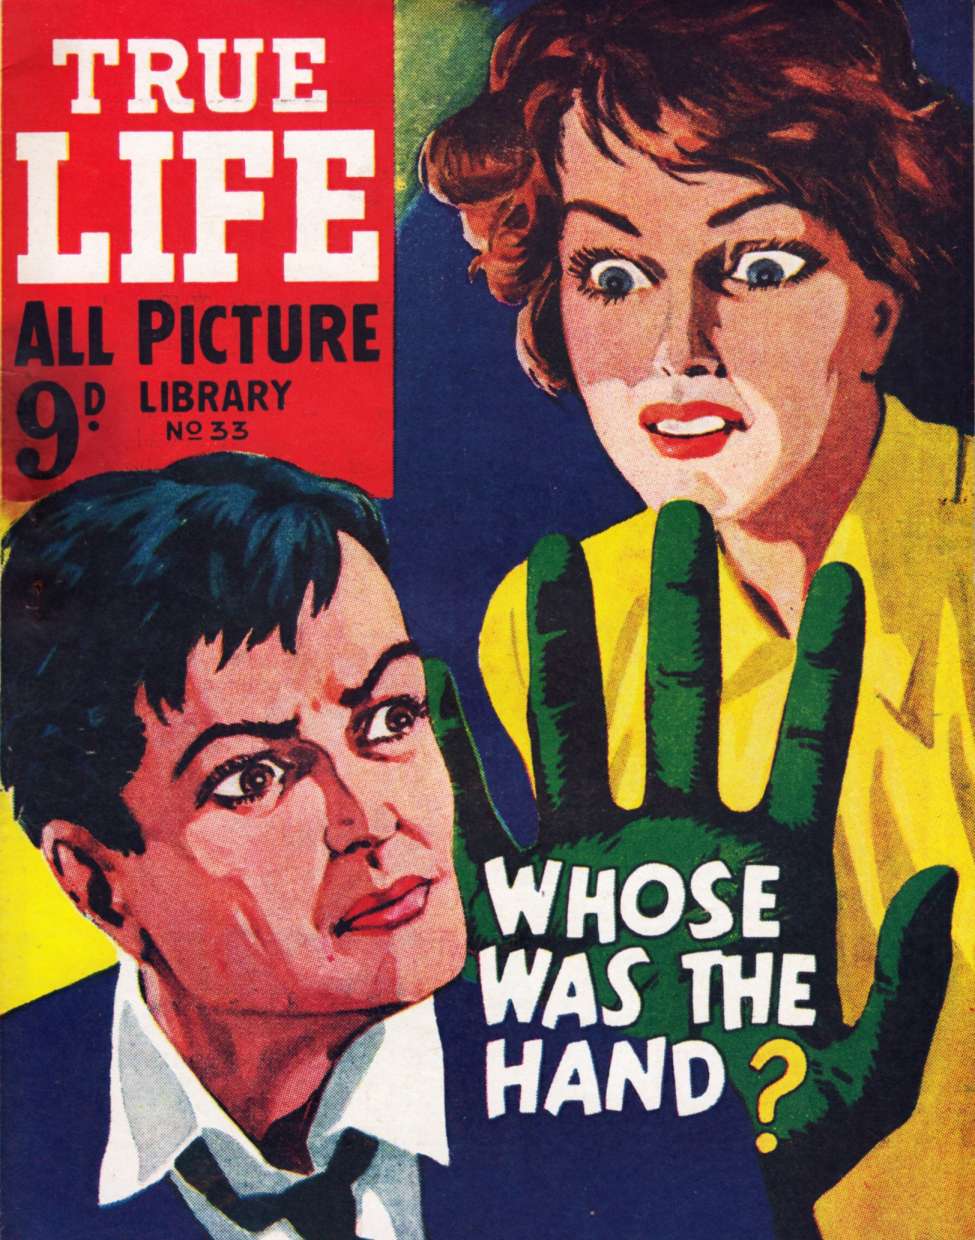 Book Cover For True Life Library 33 - Whose Was the Hand?